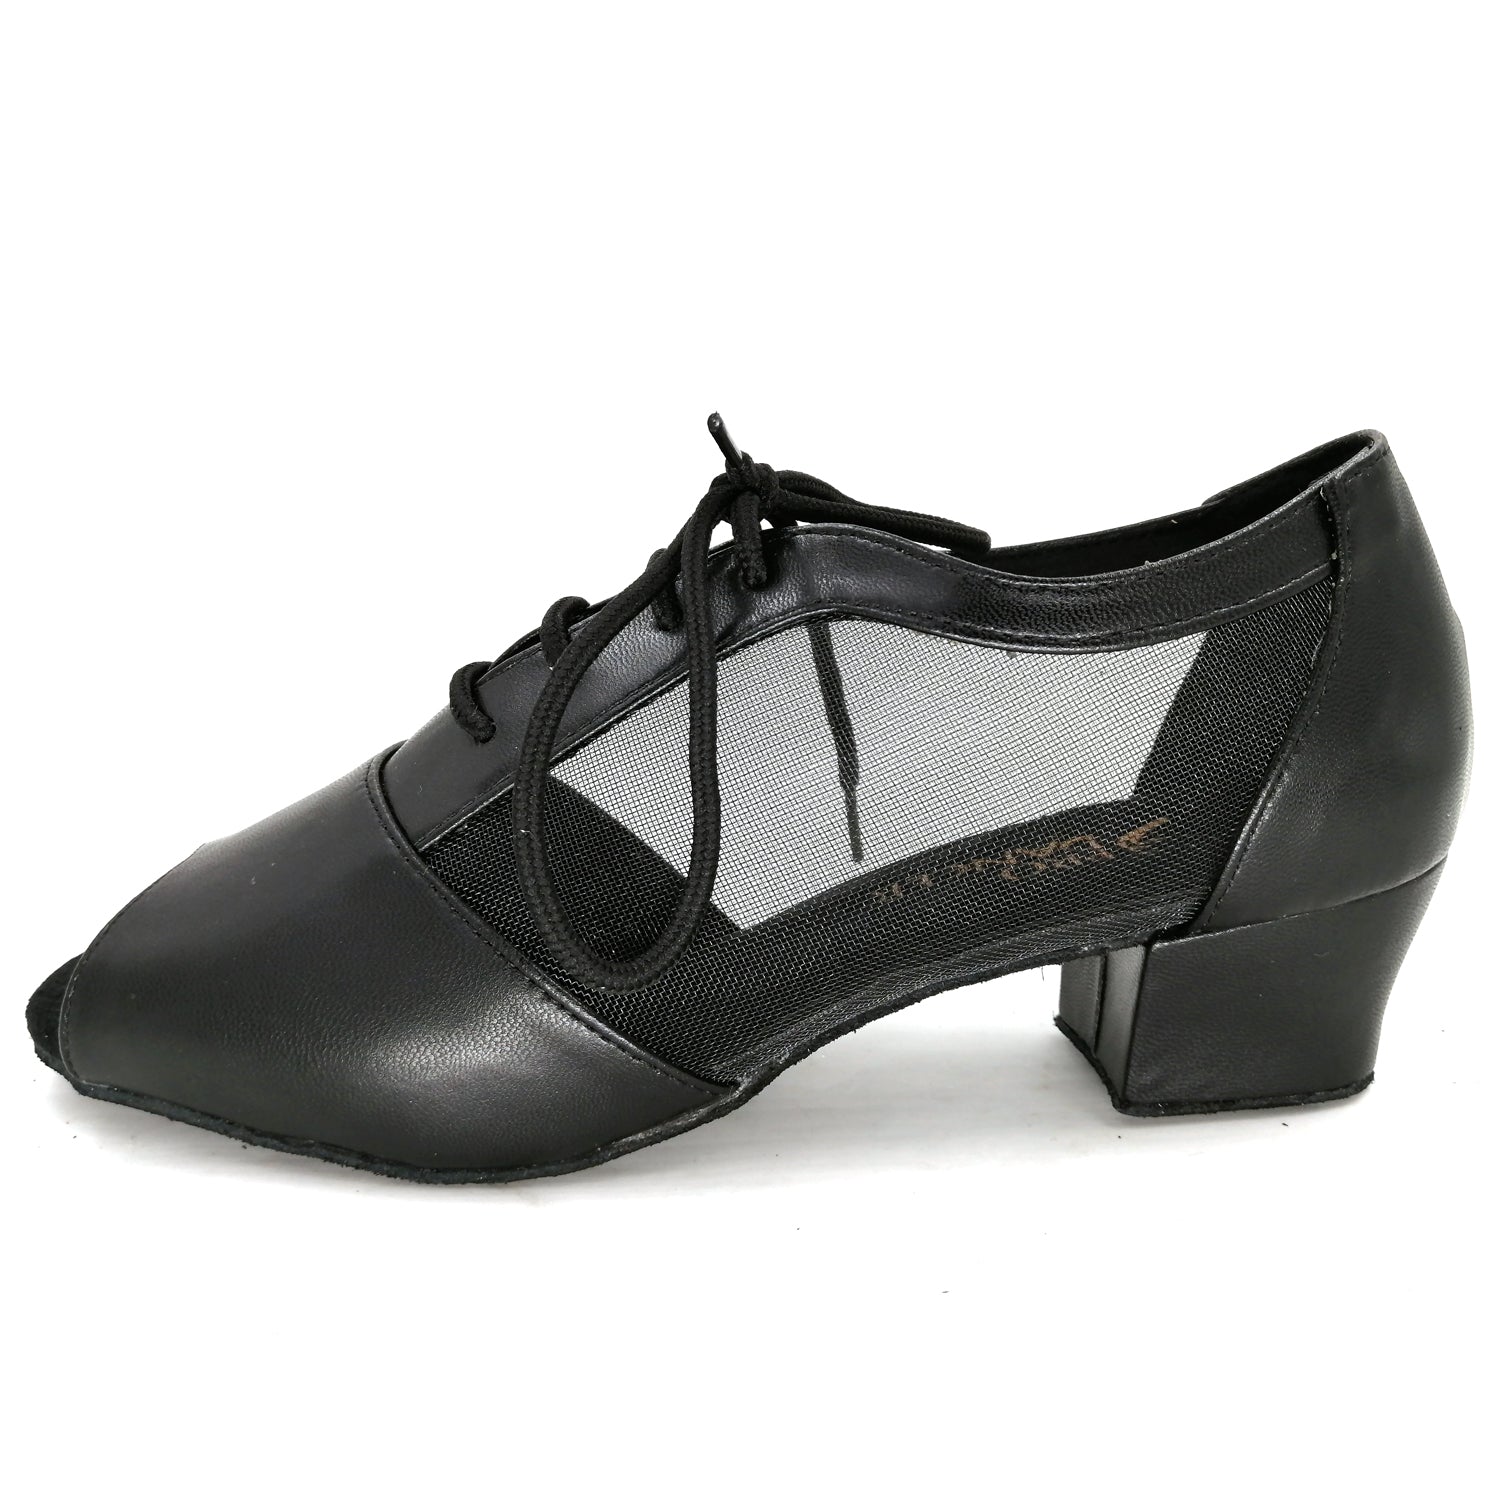 Women Ballroom Dancing Shoes with Suede Sole, Lace-up Peep-toe Design in Black for Tango Latin Practice (PD1141D)0